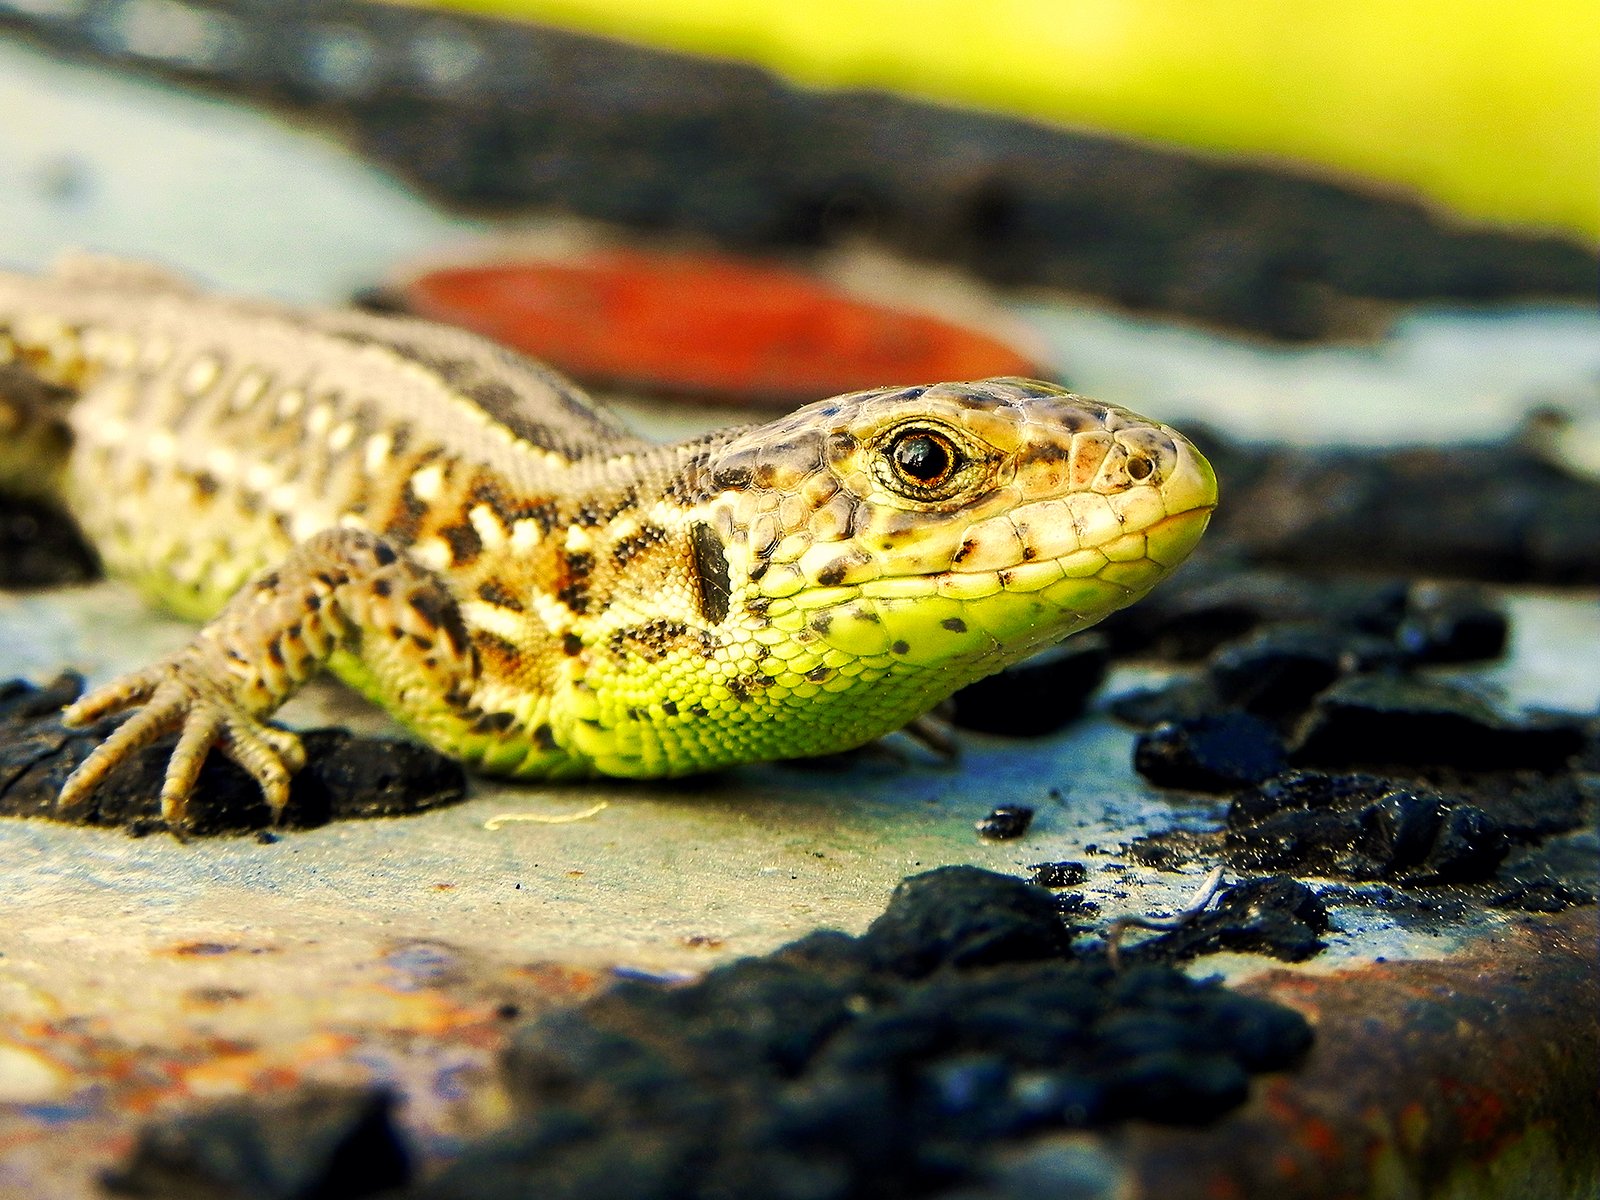 an lizard sitting on the ground, with mud and other dirt scattered around him